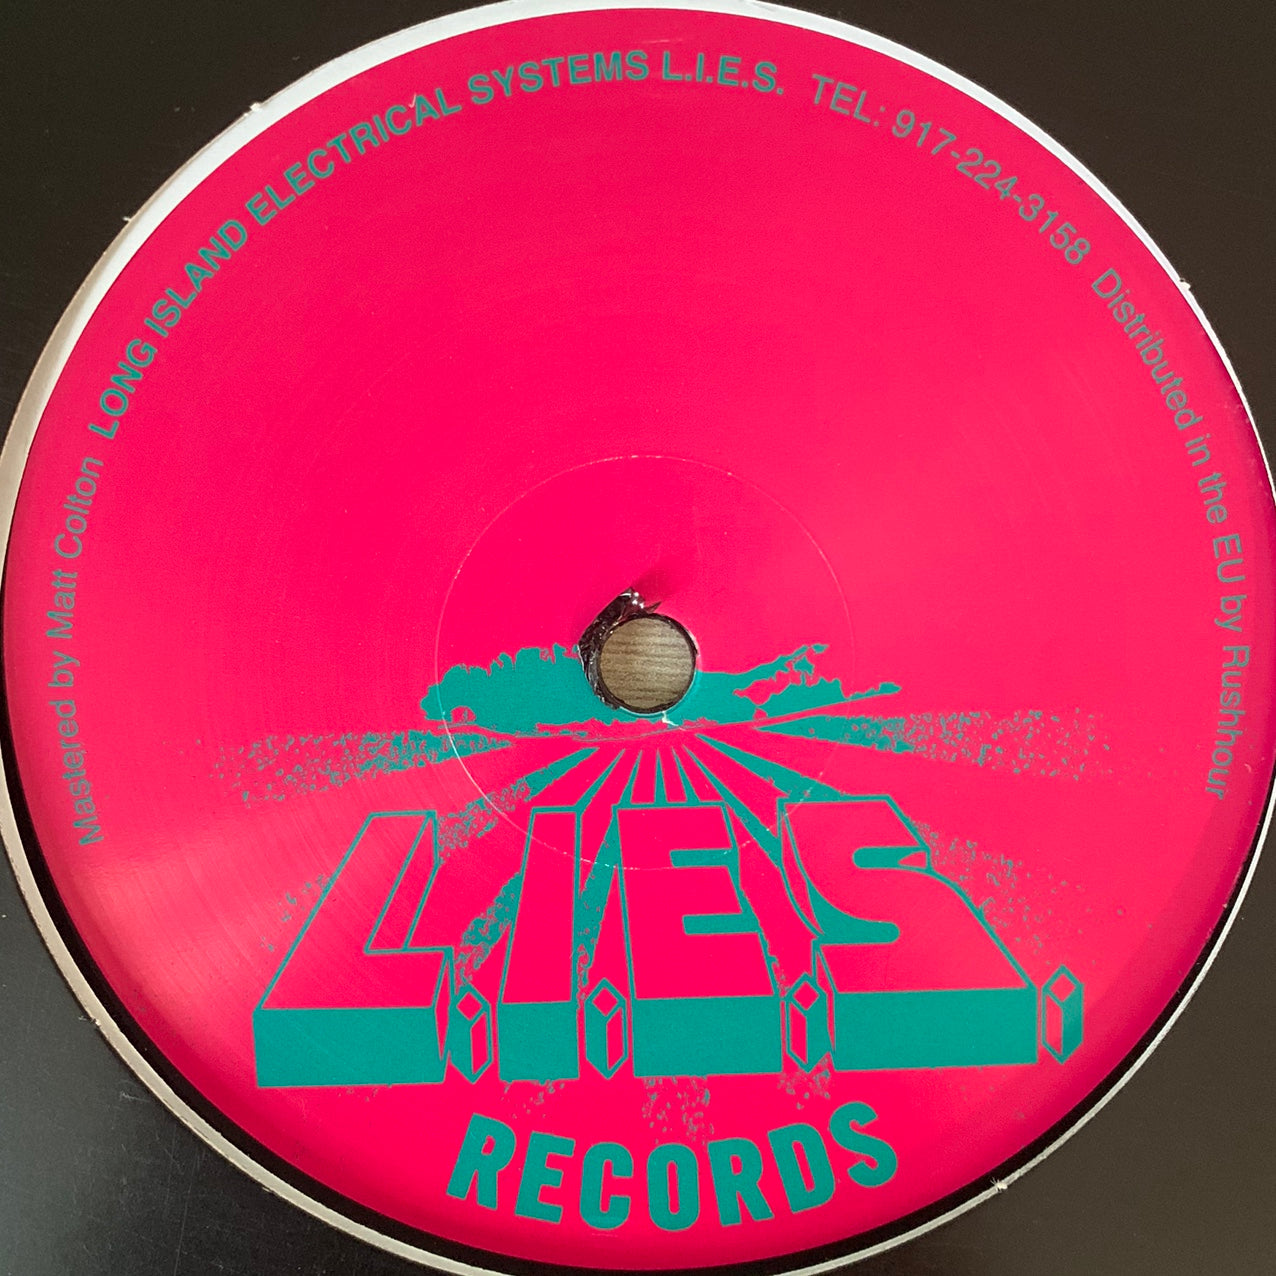 Person Of Interest “Call This Number” on Long Island Electrical System’s L.I.E.S. Records 3 Track 12inch Vinyl